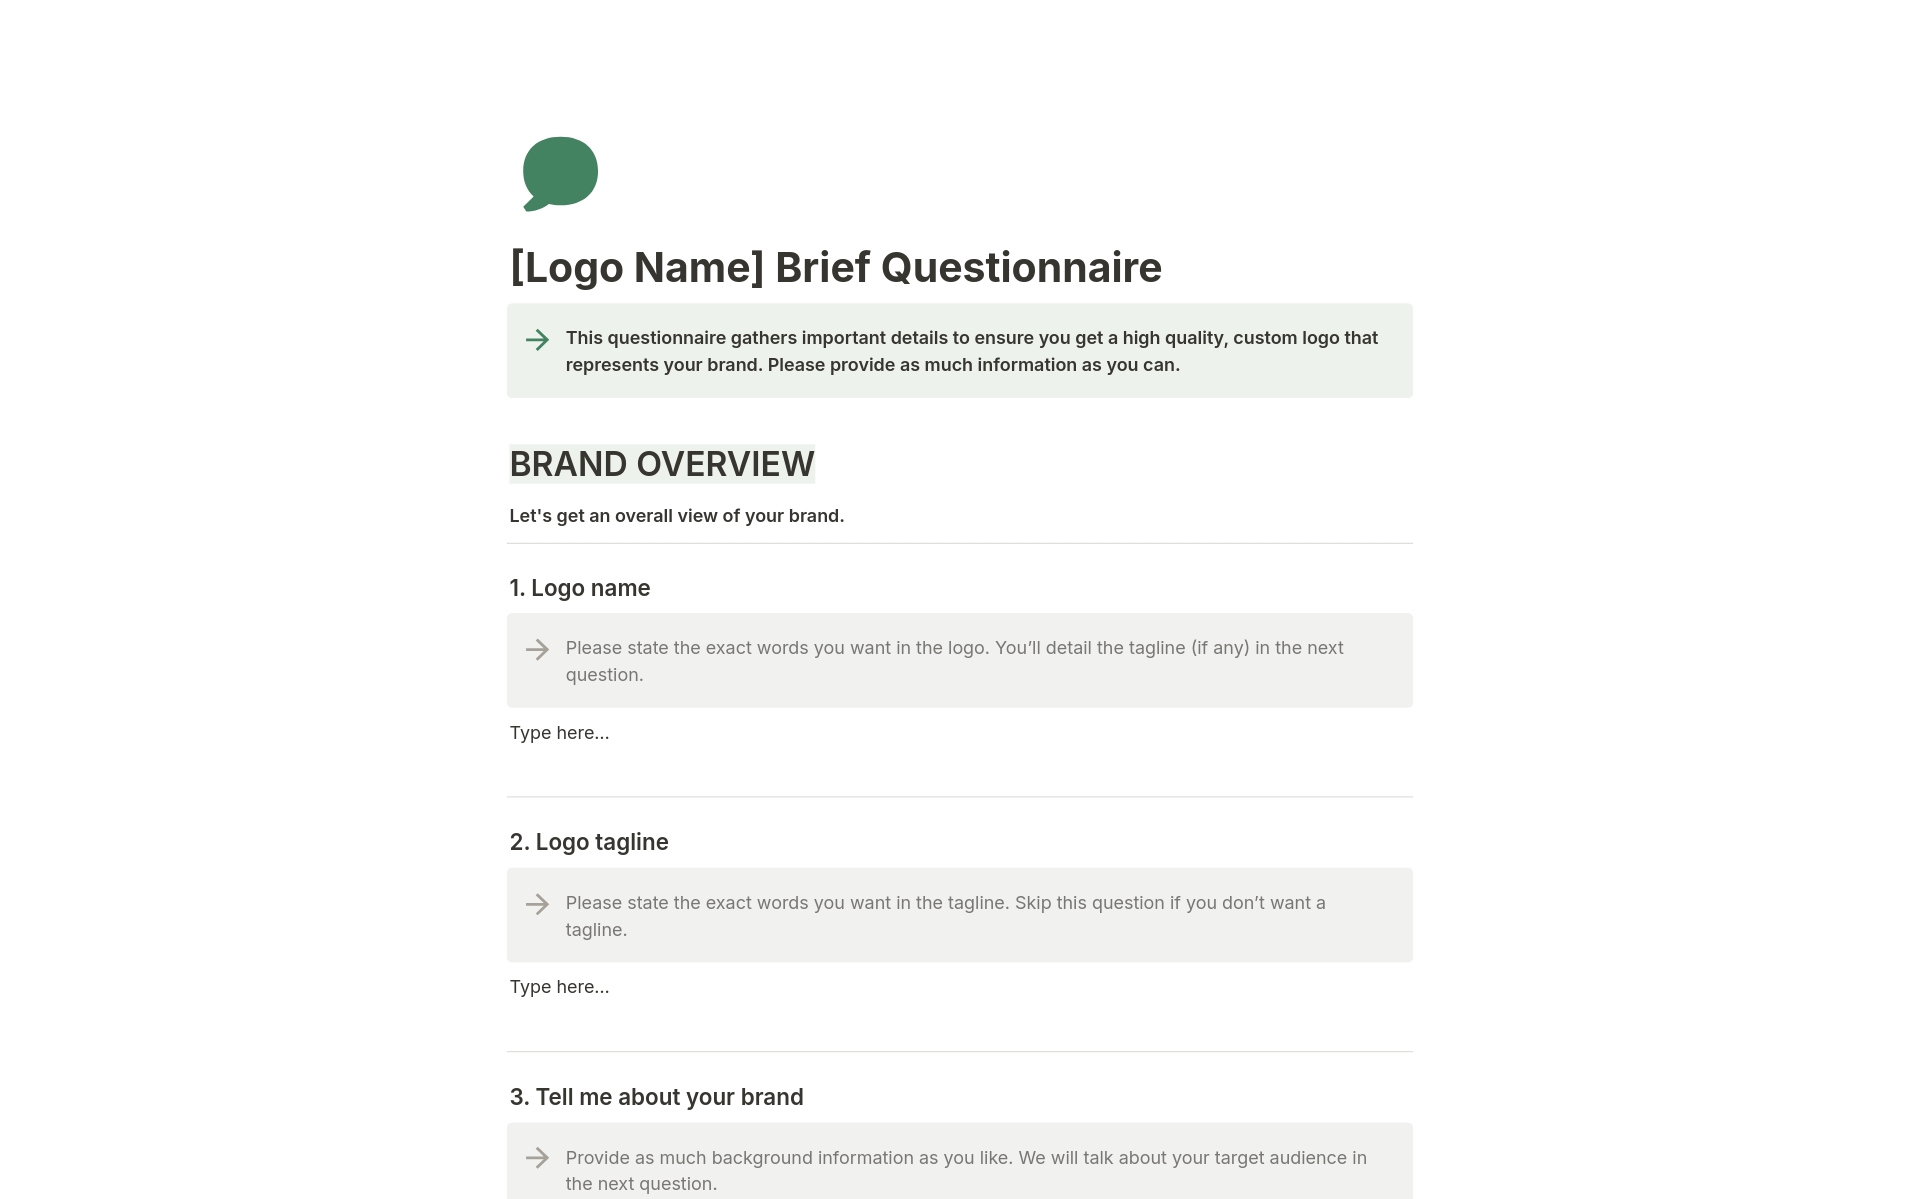 This Logo Brief Questionnaire will help you get better briefs and ask the right questions from the beginning, ensuring your logo design process goes smoothly and you produce high-quality results